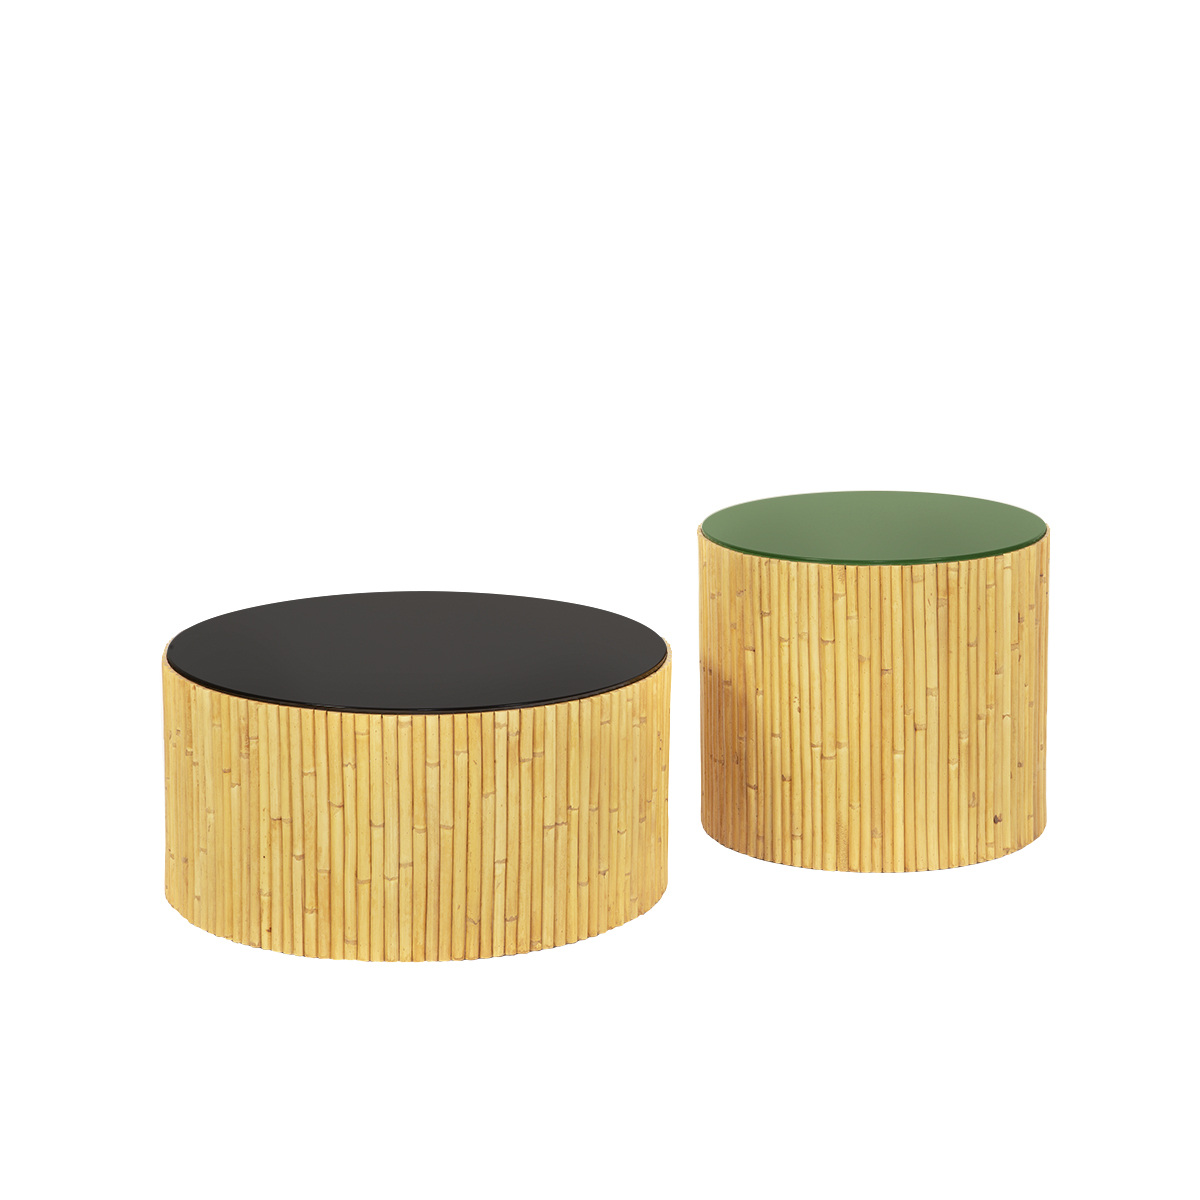 Duo of Coffee Tables Rivera, Natural / Black - ø60 x H30 cm and ø45 x H40 cm - Rattan / Lacquered wood - image 6